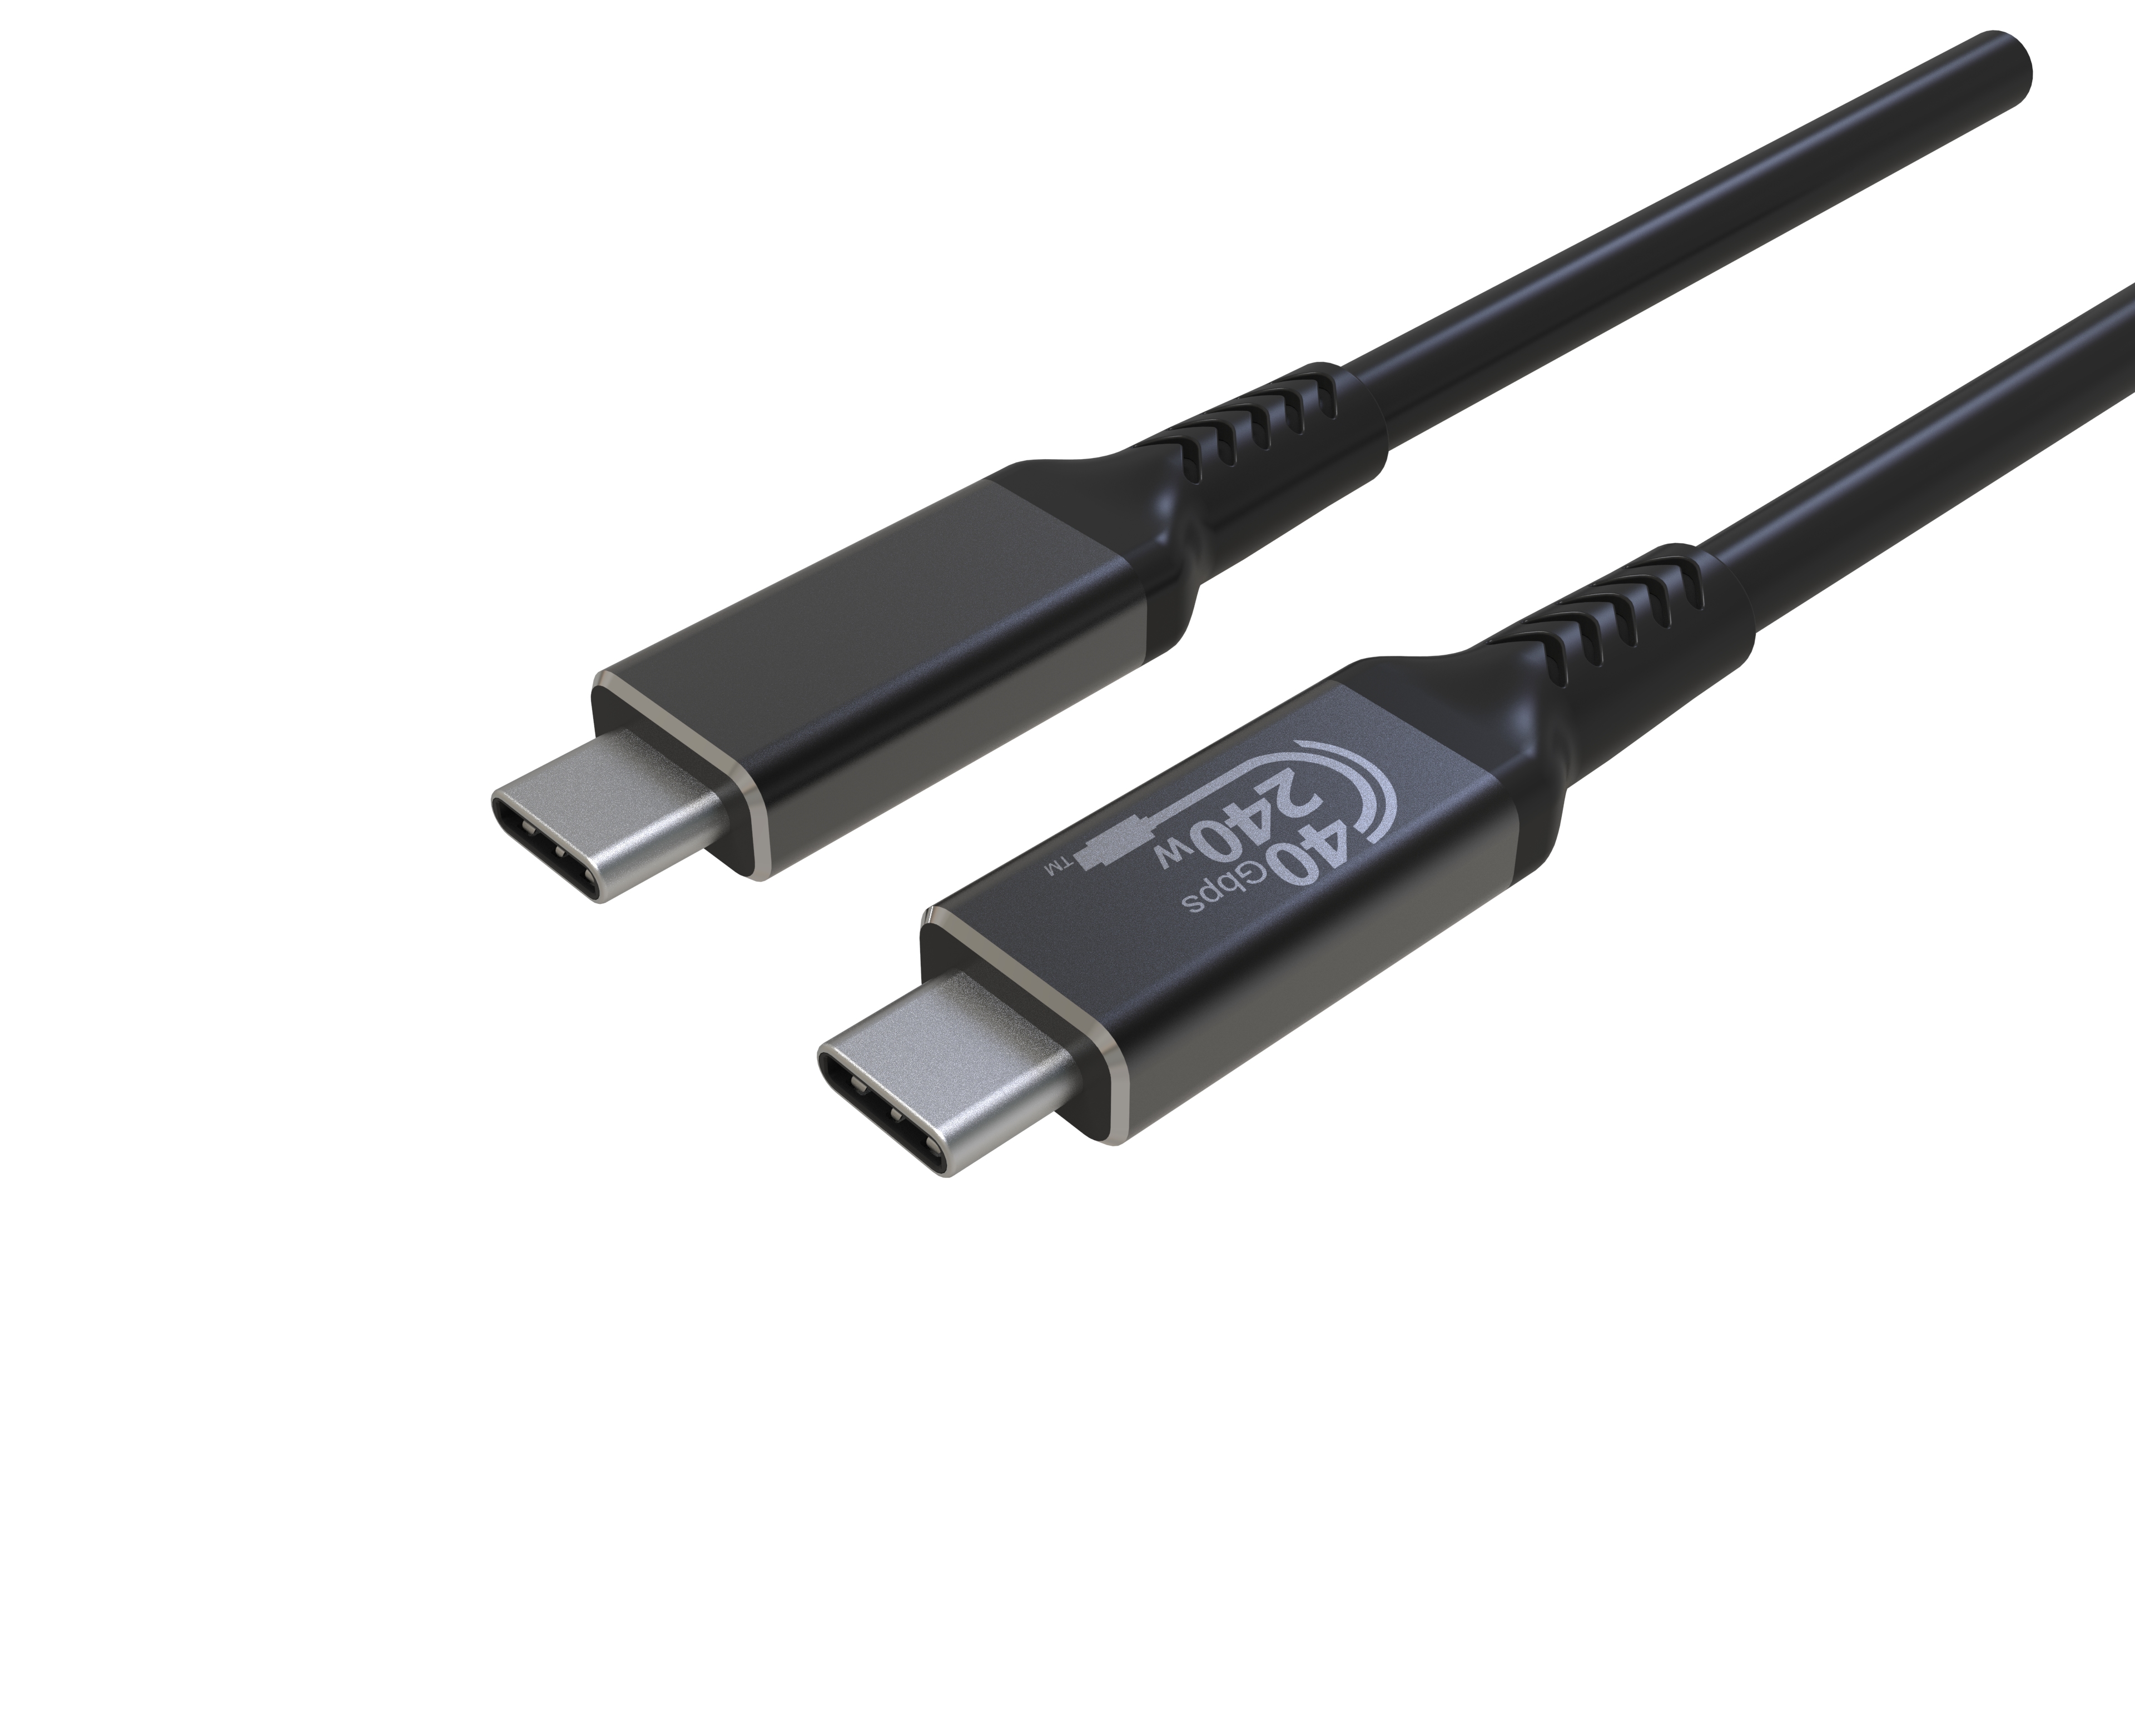 High Speed USB4 USB 4 Cable PD 240W 40Gbp...